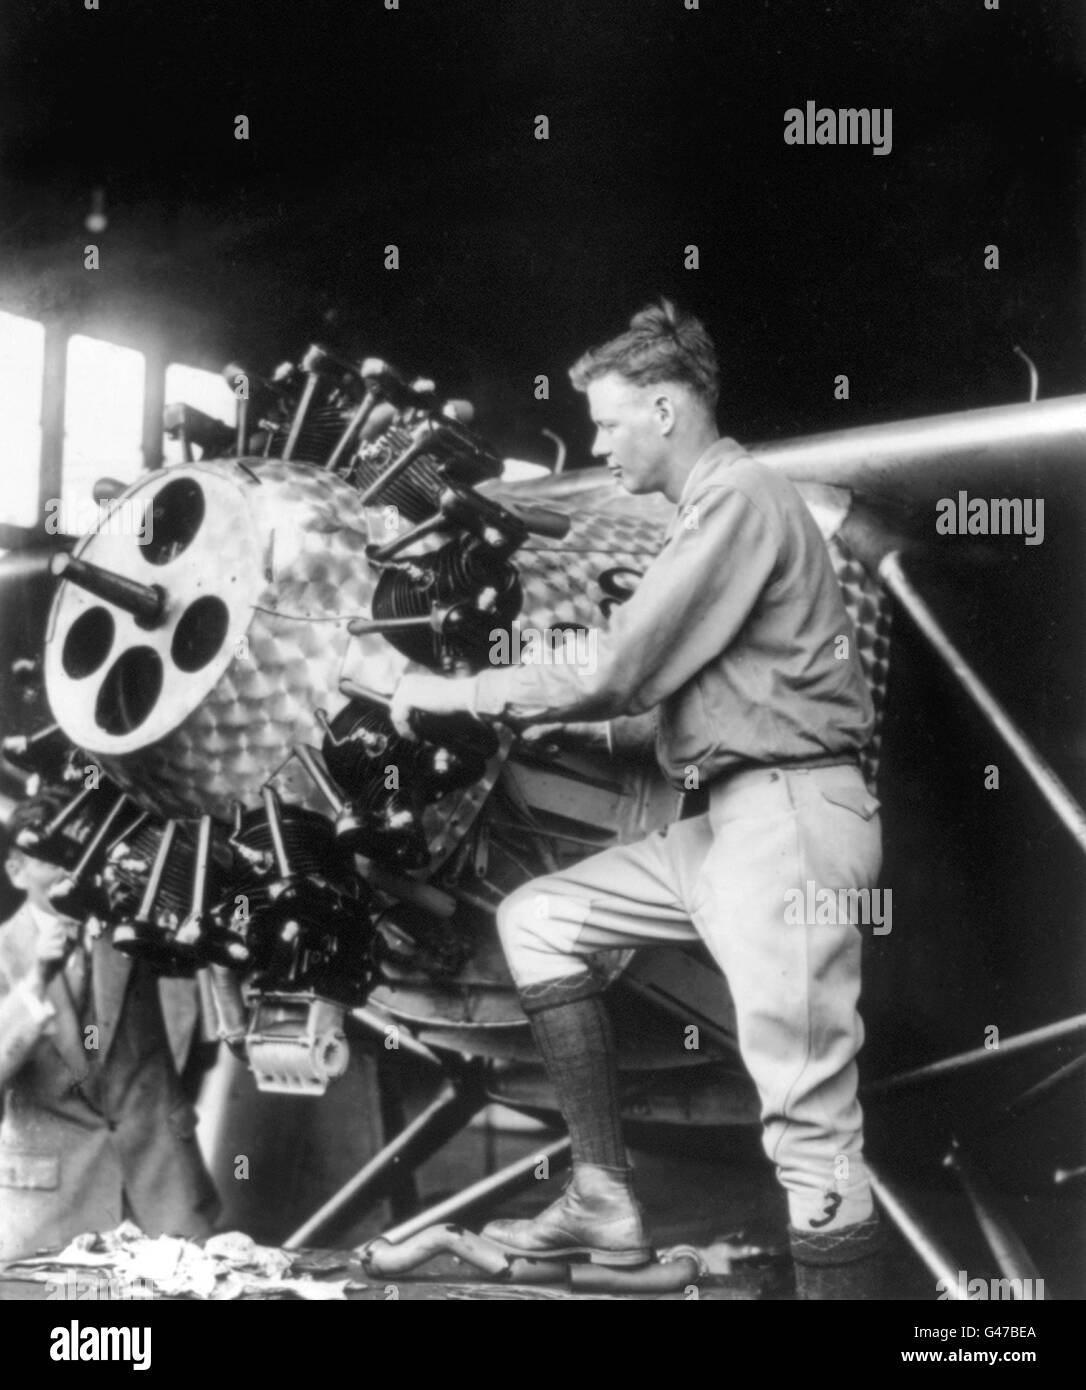 Charles Lindbergh (1902-1974) working on the engine of his airplane 'Spirit of St. Louis'. Photo c.1927. Stock Photo